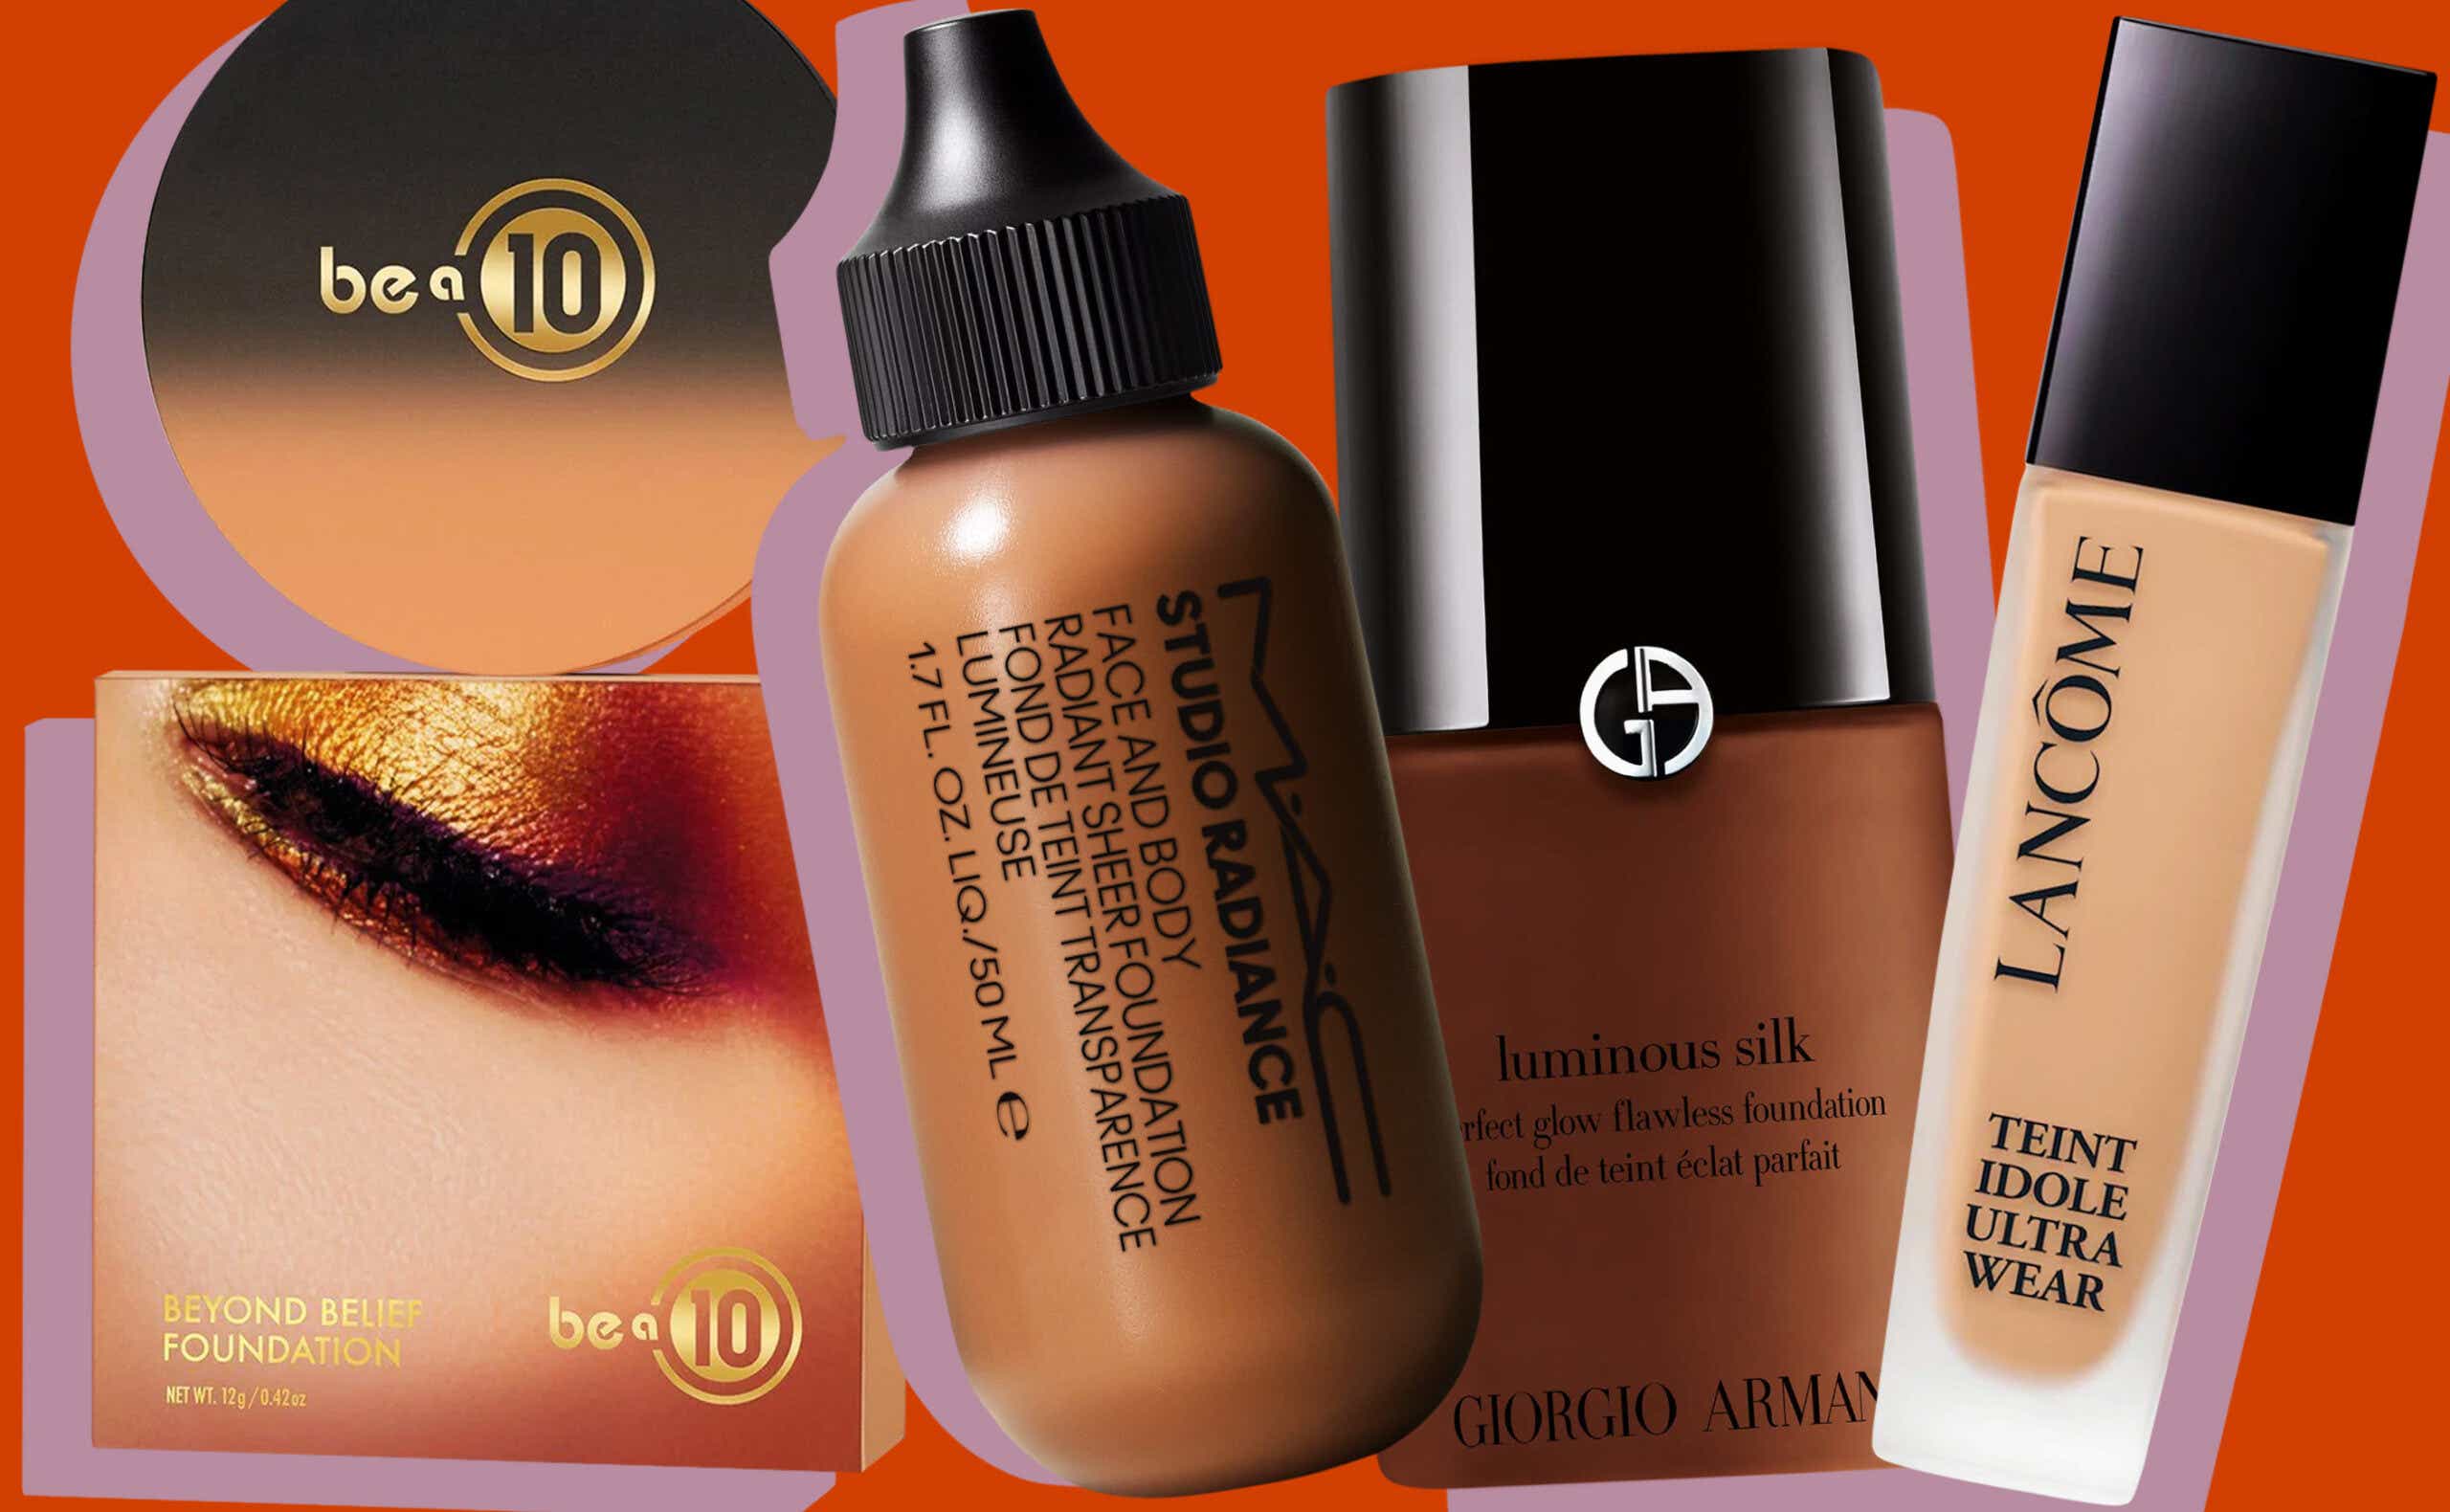 Best Foundations for Mature Skin: Expert Tips on How to Apply & Find